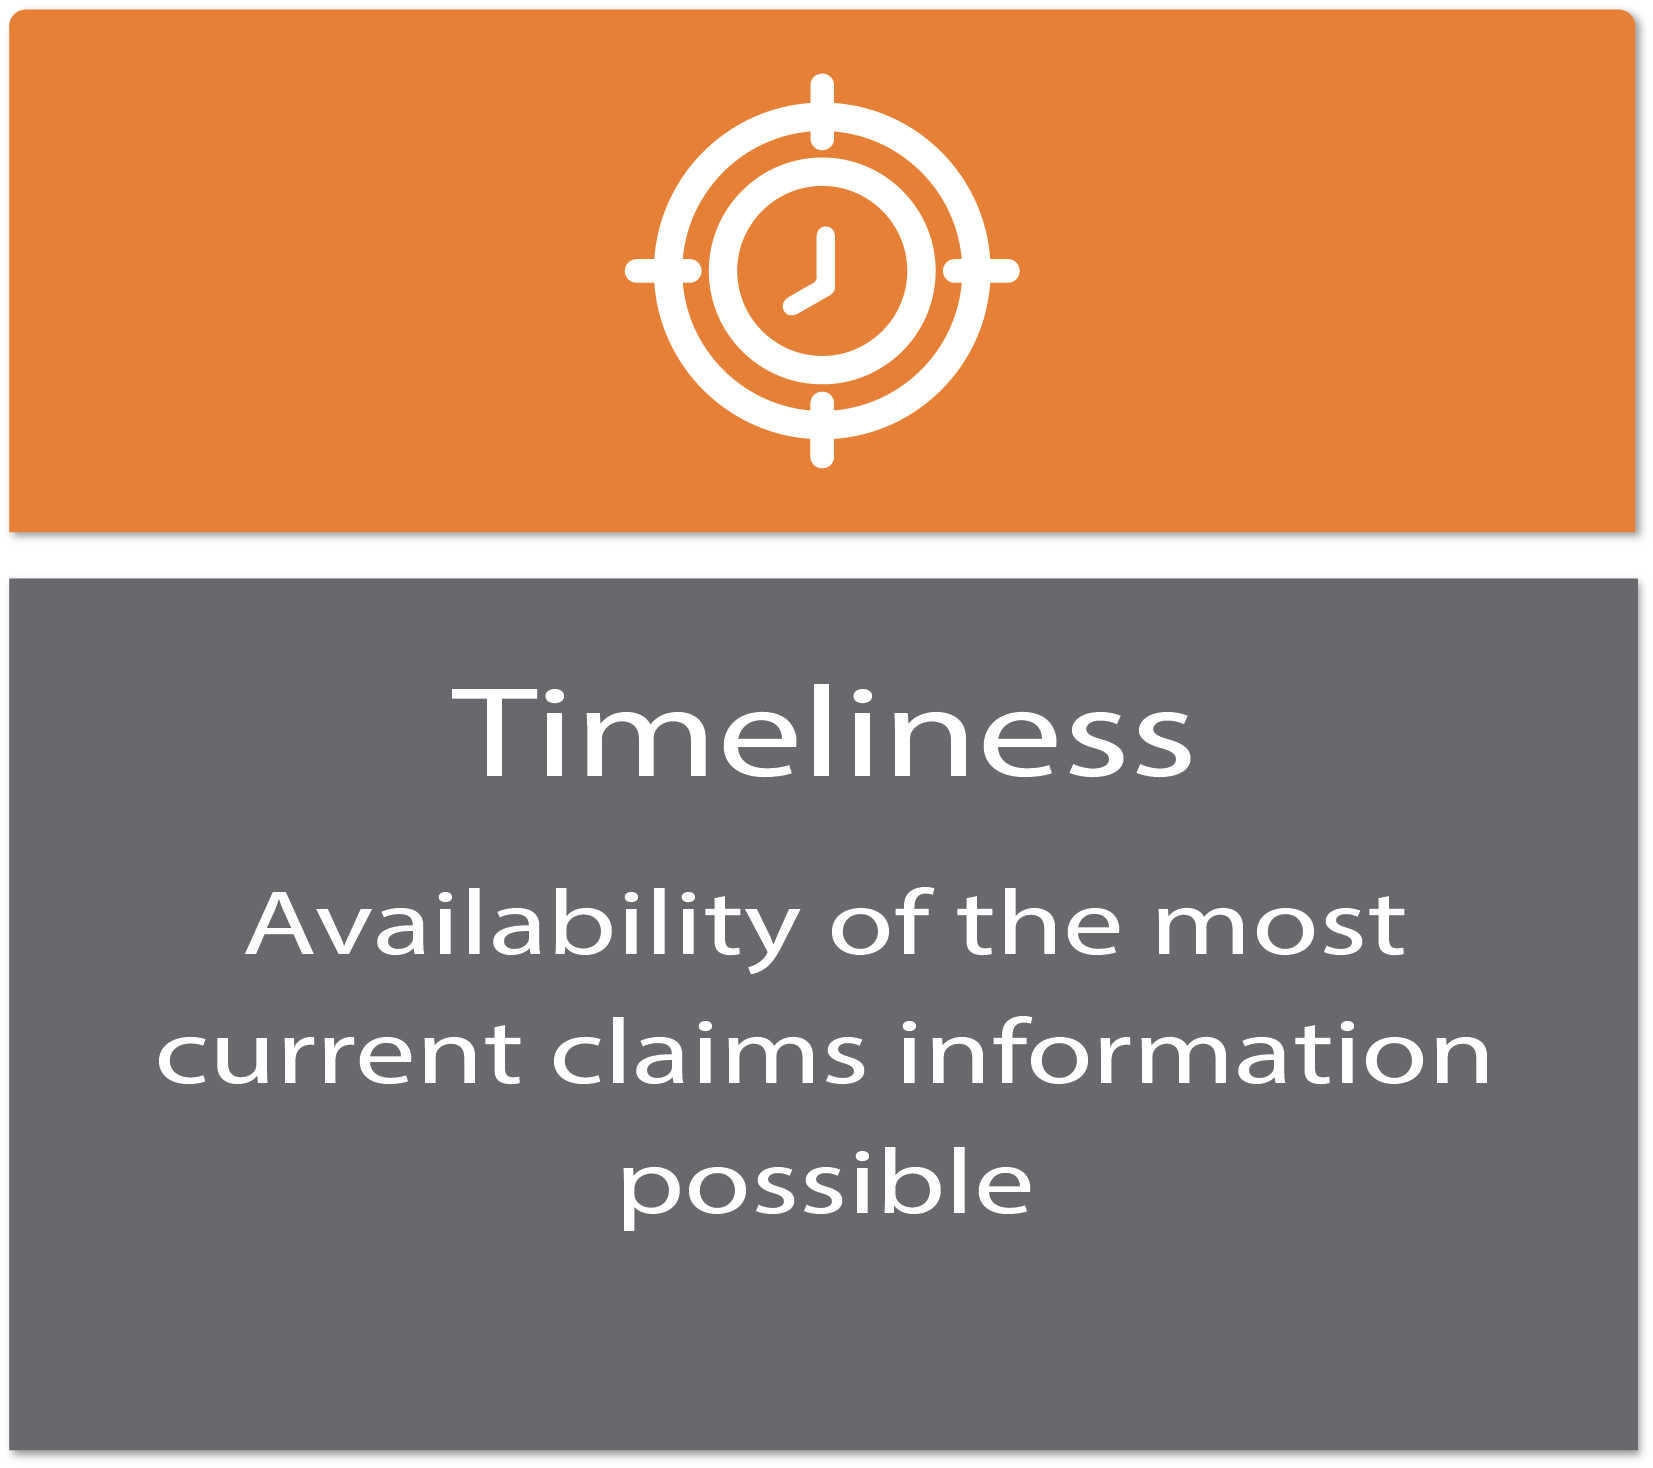 Timeliness: Availability of the most current claims information possible. 